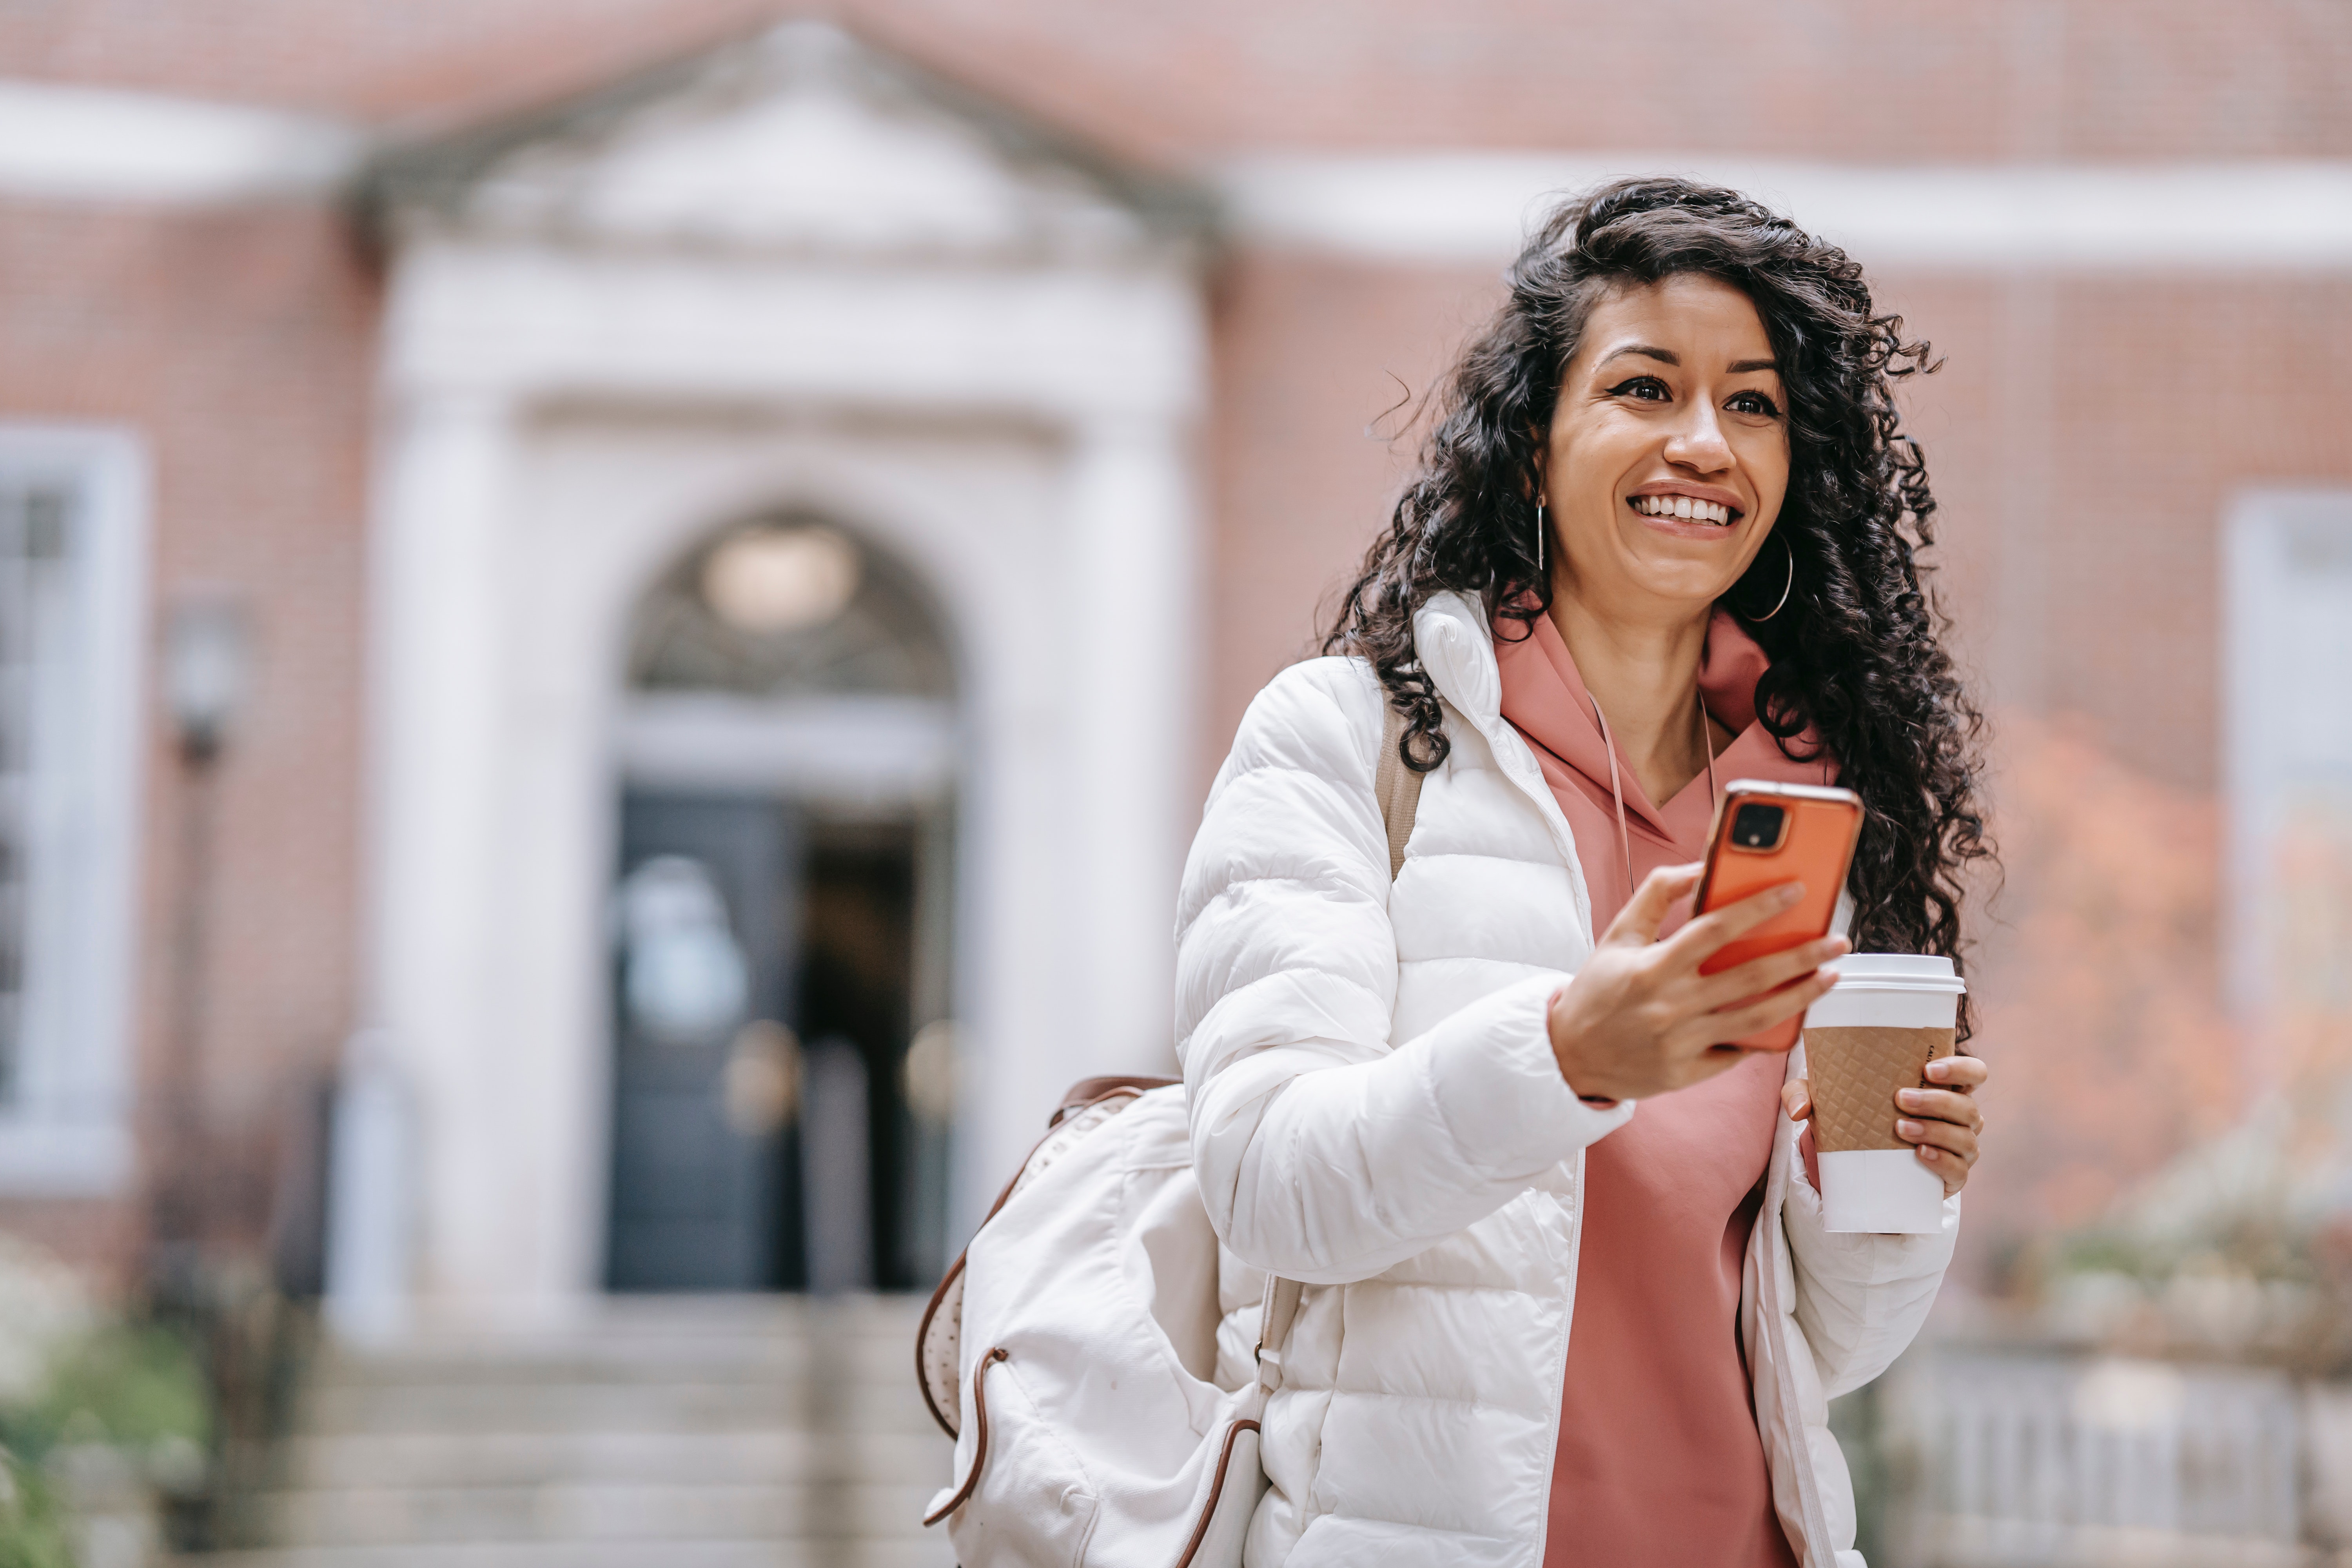 Smiling female college student holding a cup of coffee and a smartphone.